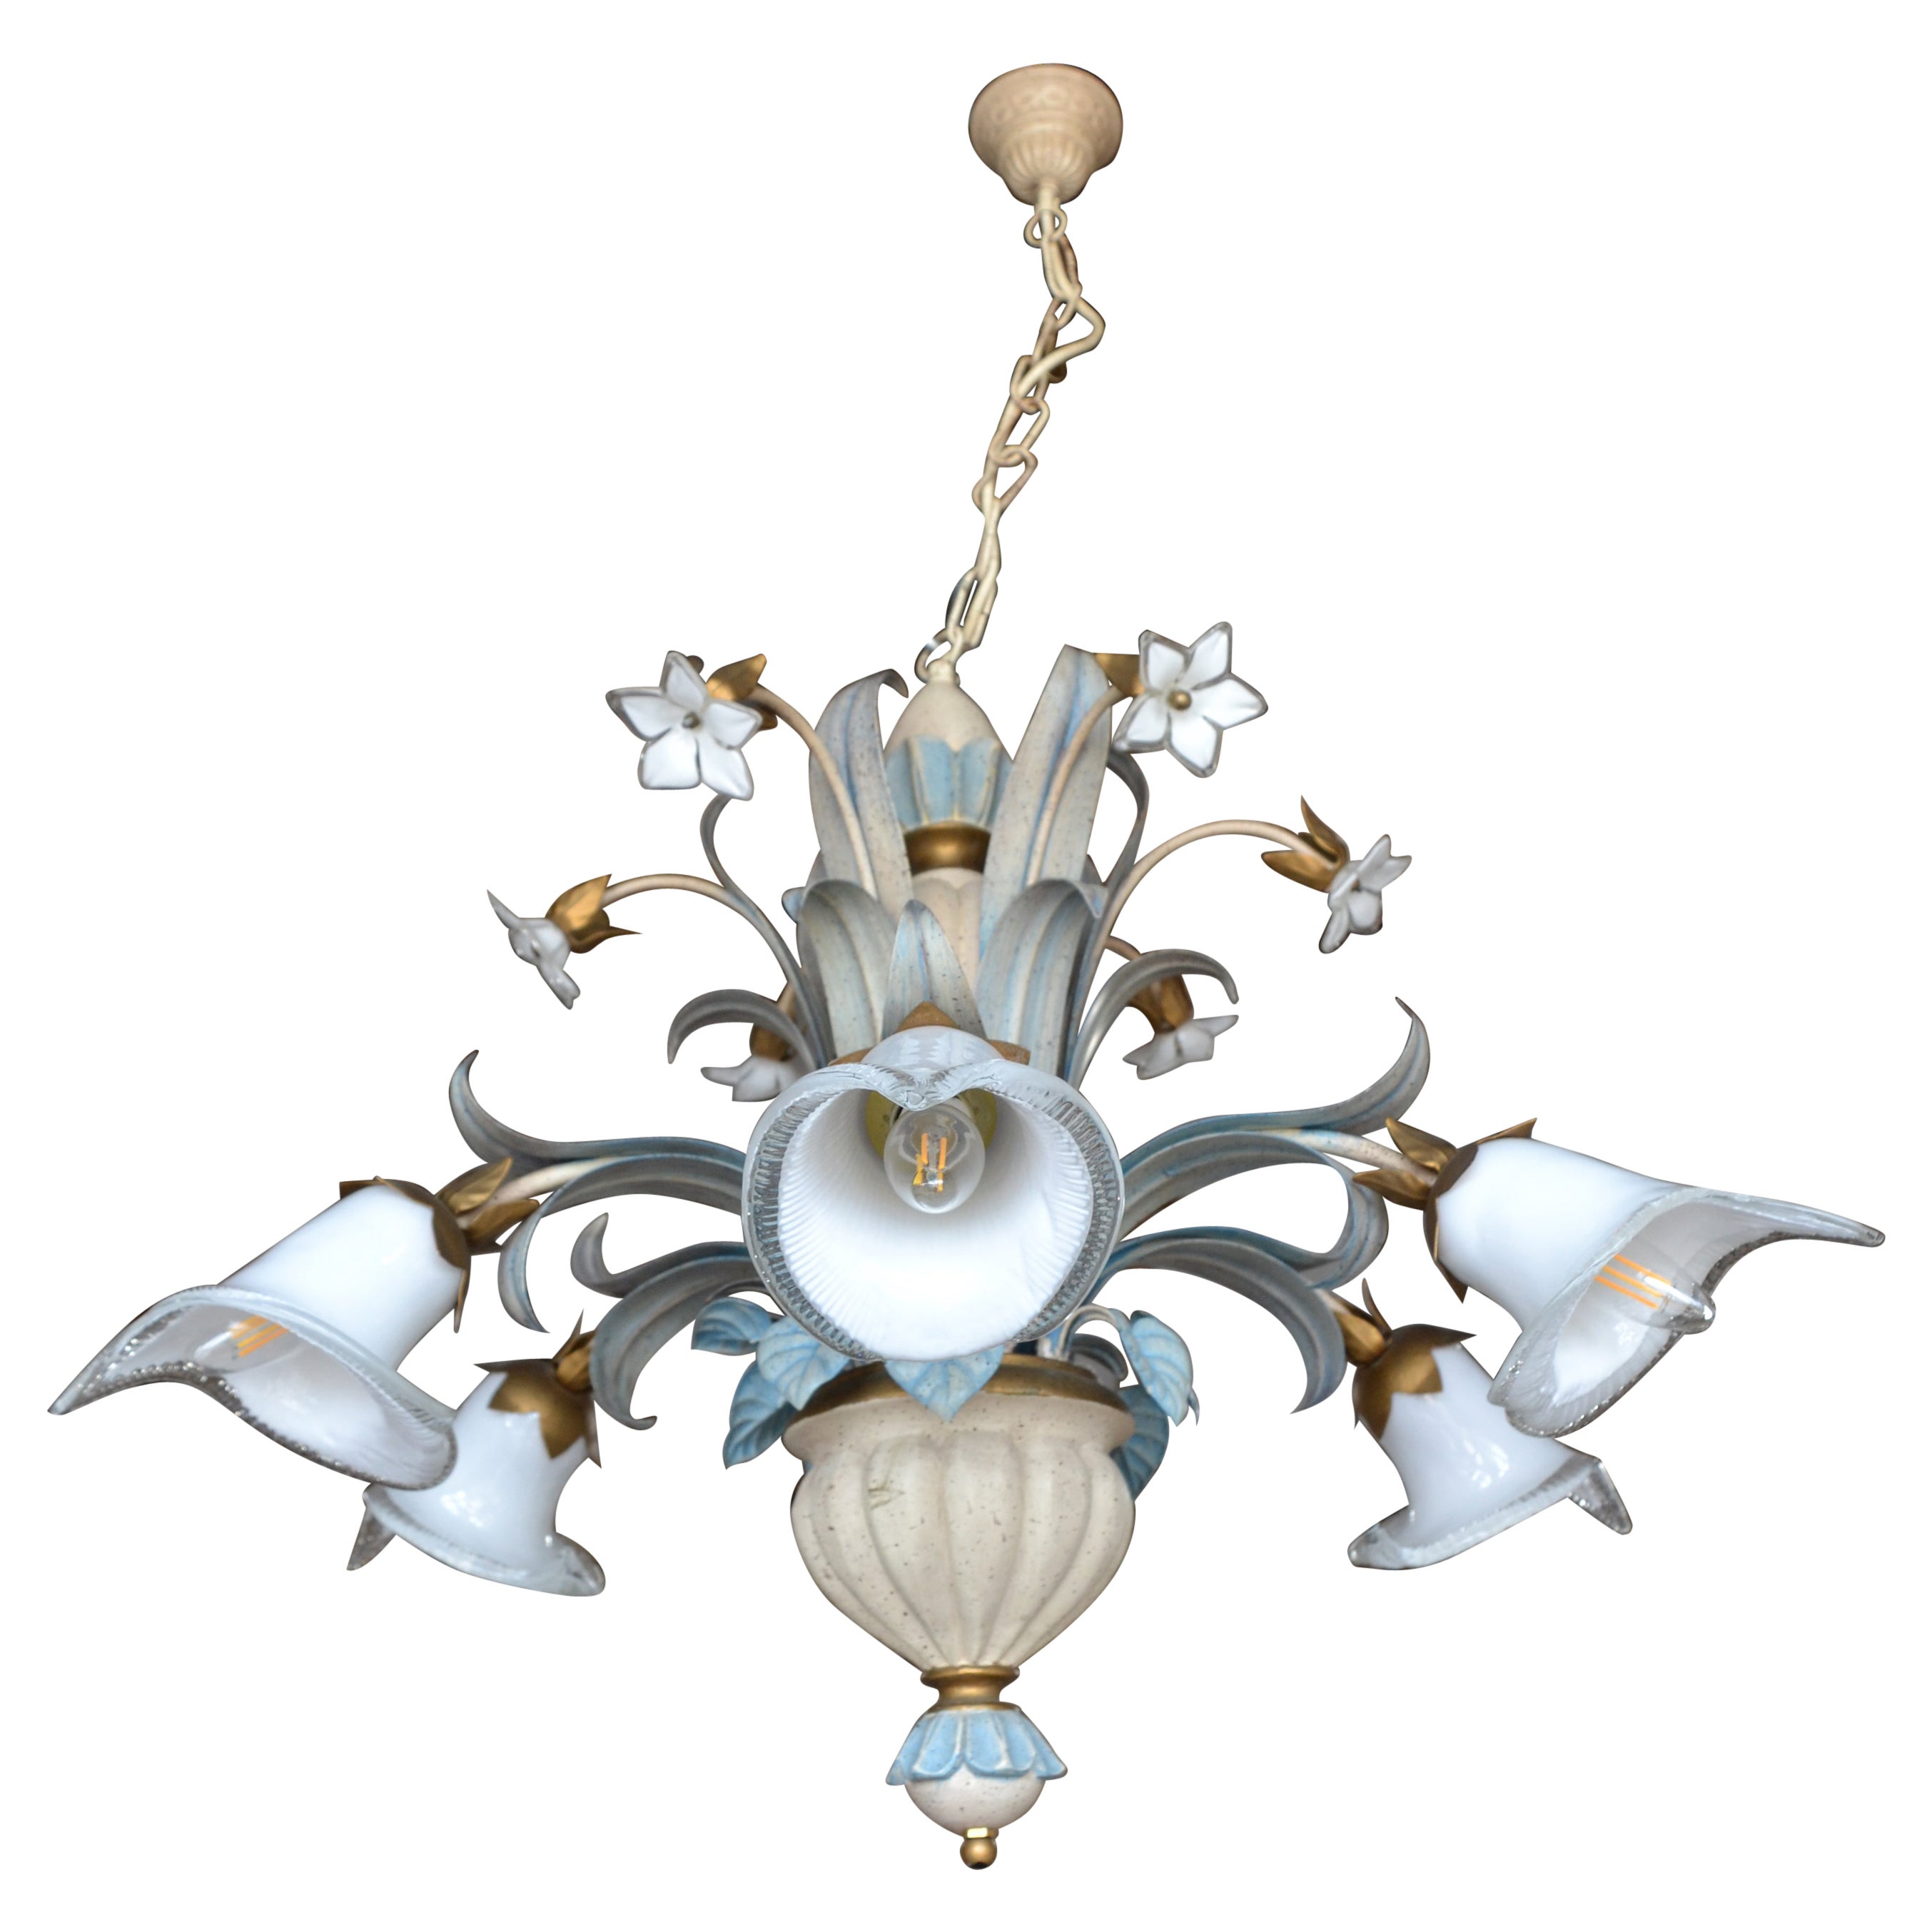 Late 20th Century Venetian 5 light Chandelier with white flowers and shades